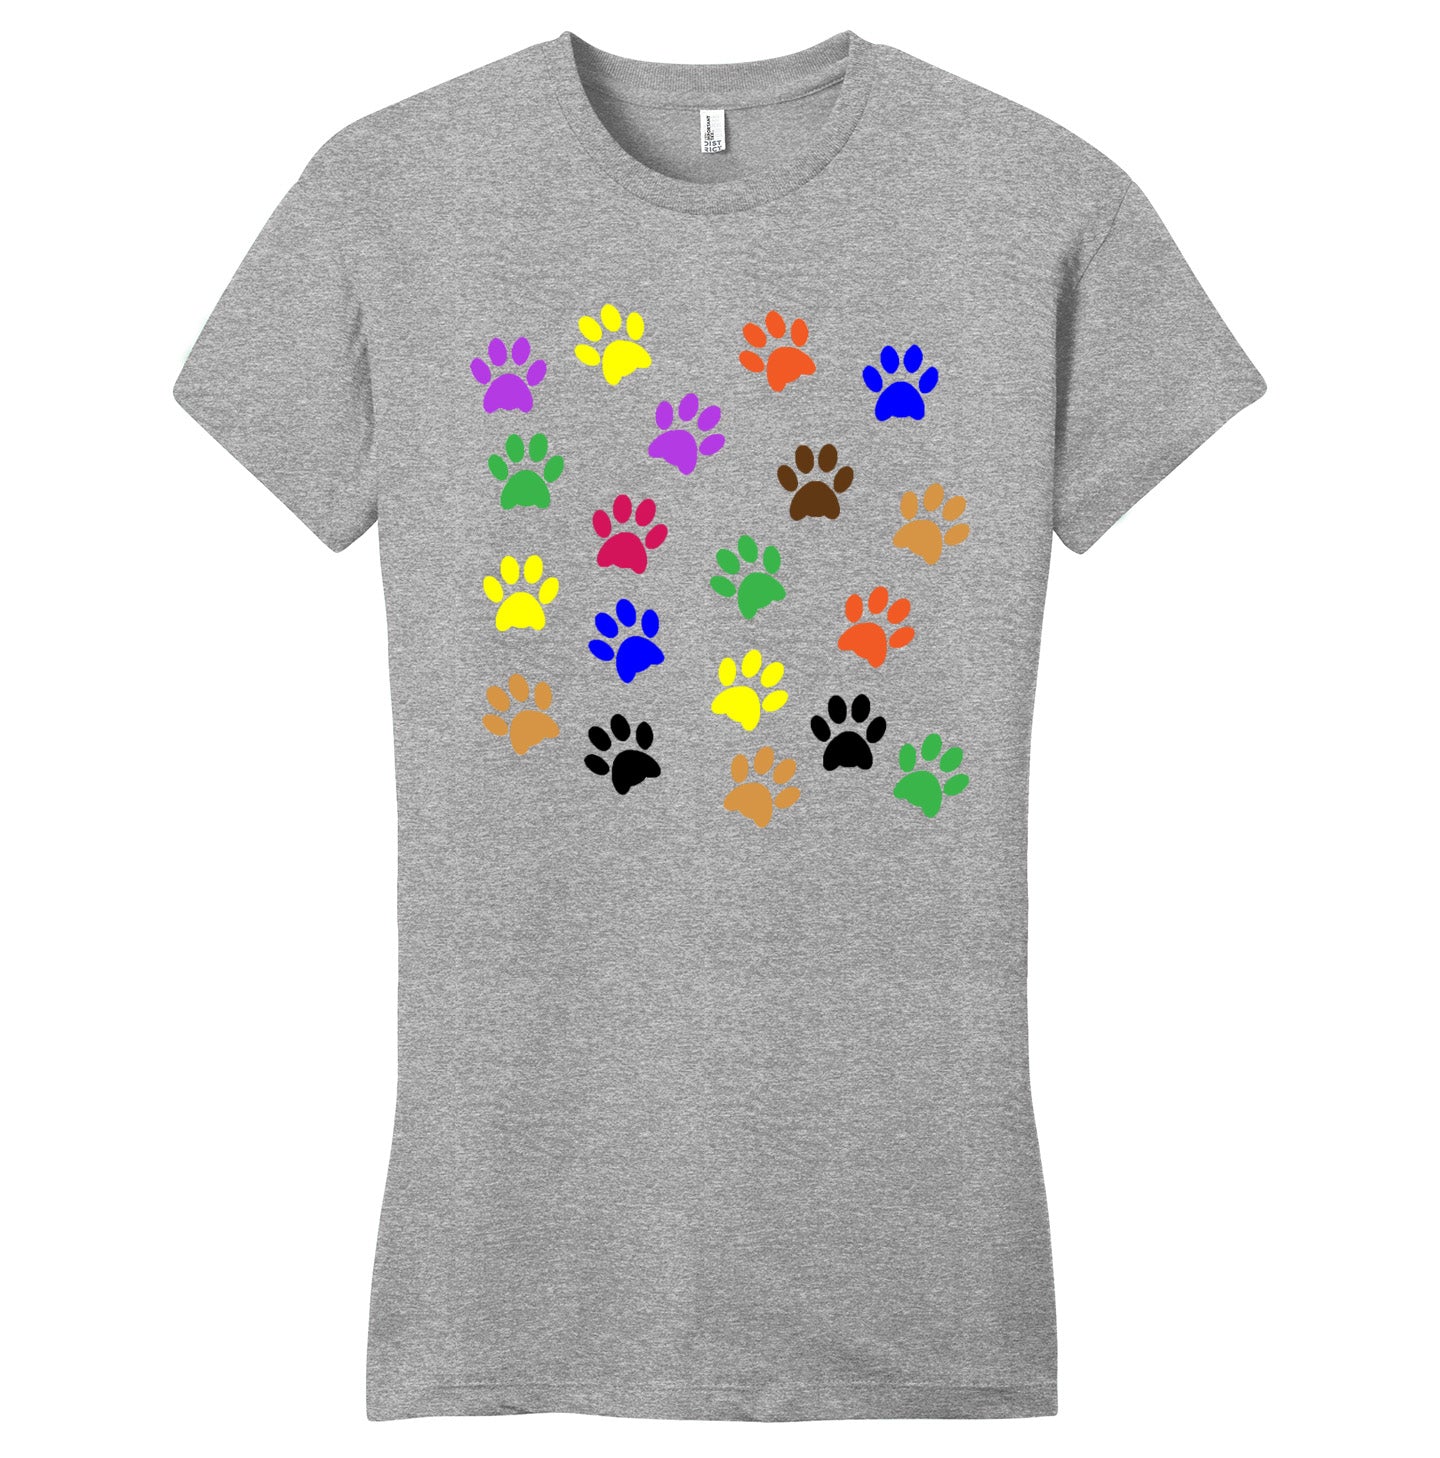 Colorful Paw Prints - Women's Fitted T-Shirt